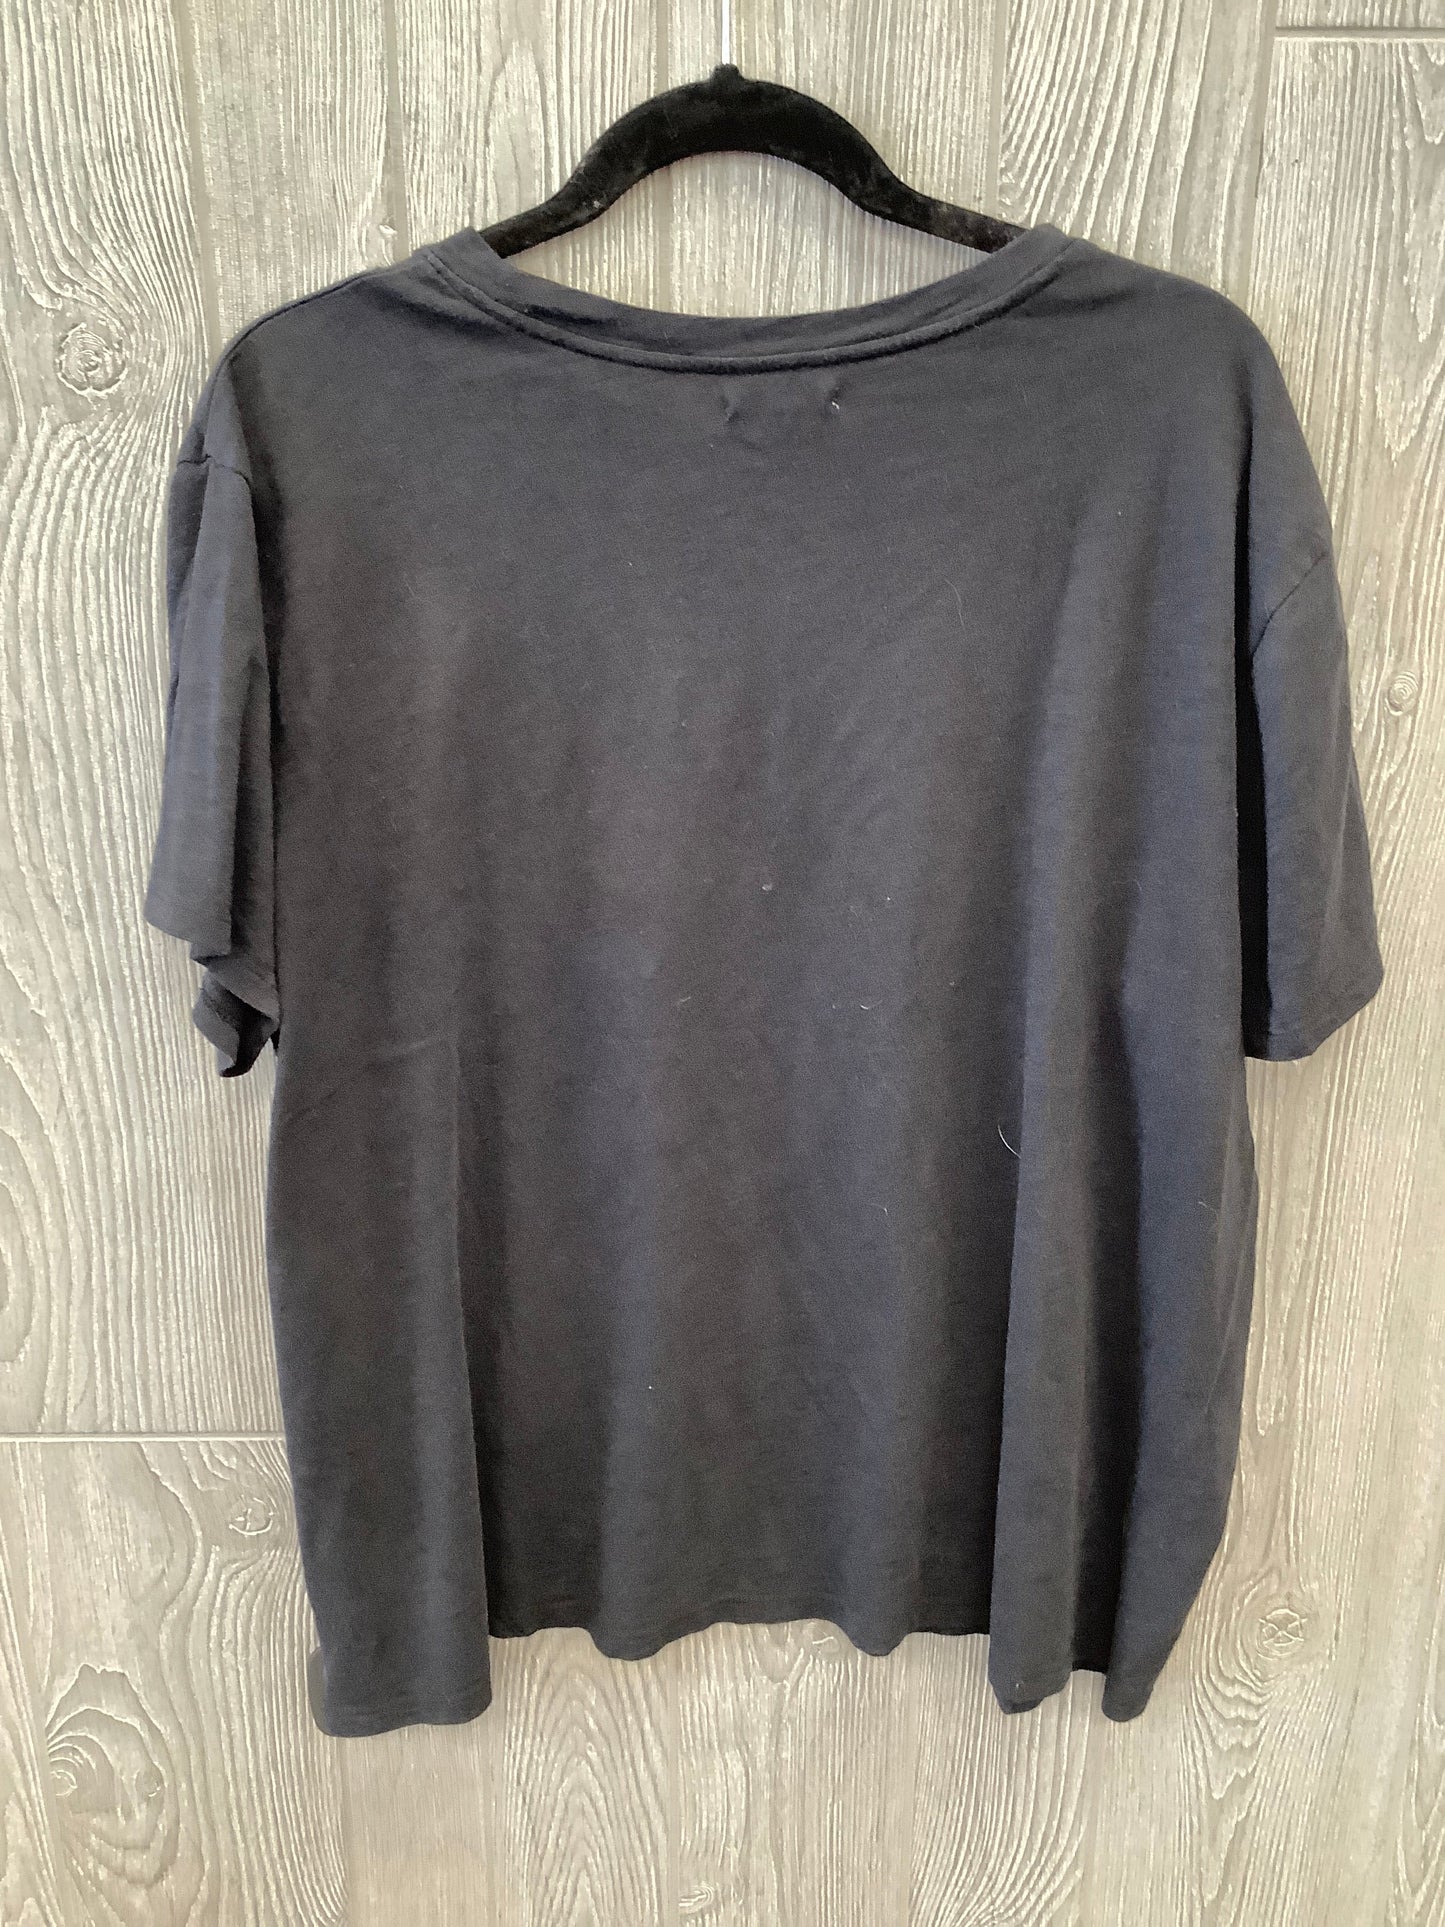 Black Top Short Sleeve Maurices, Size 1x